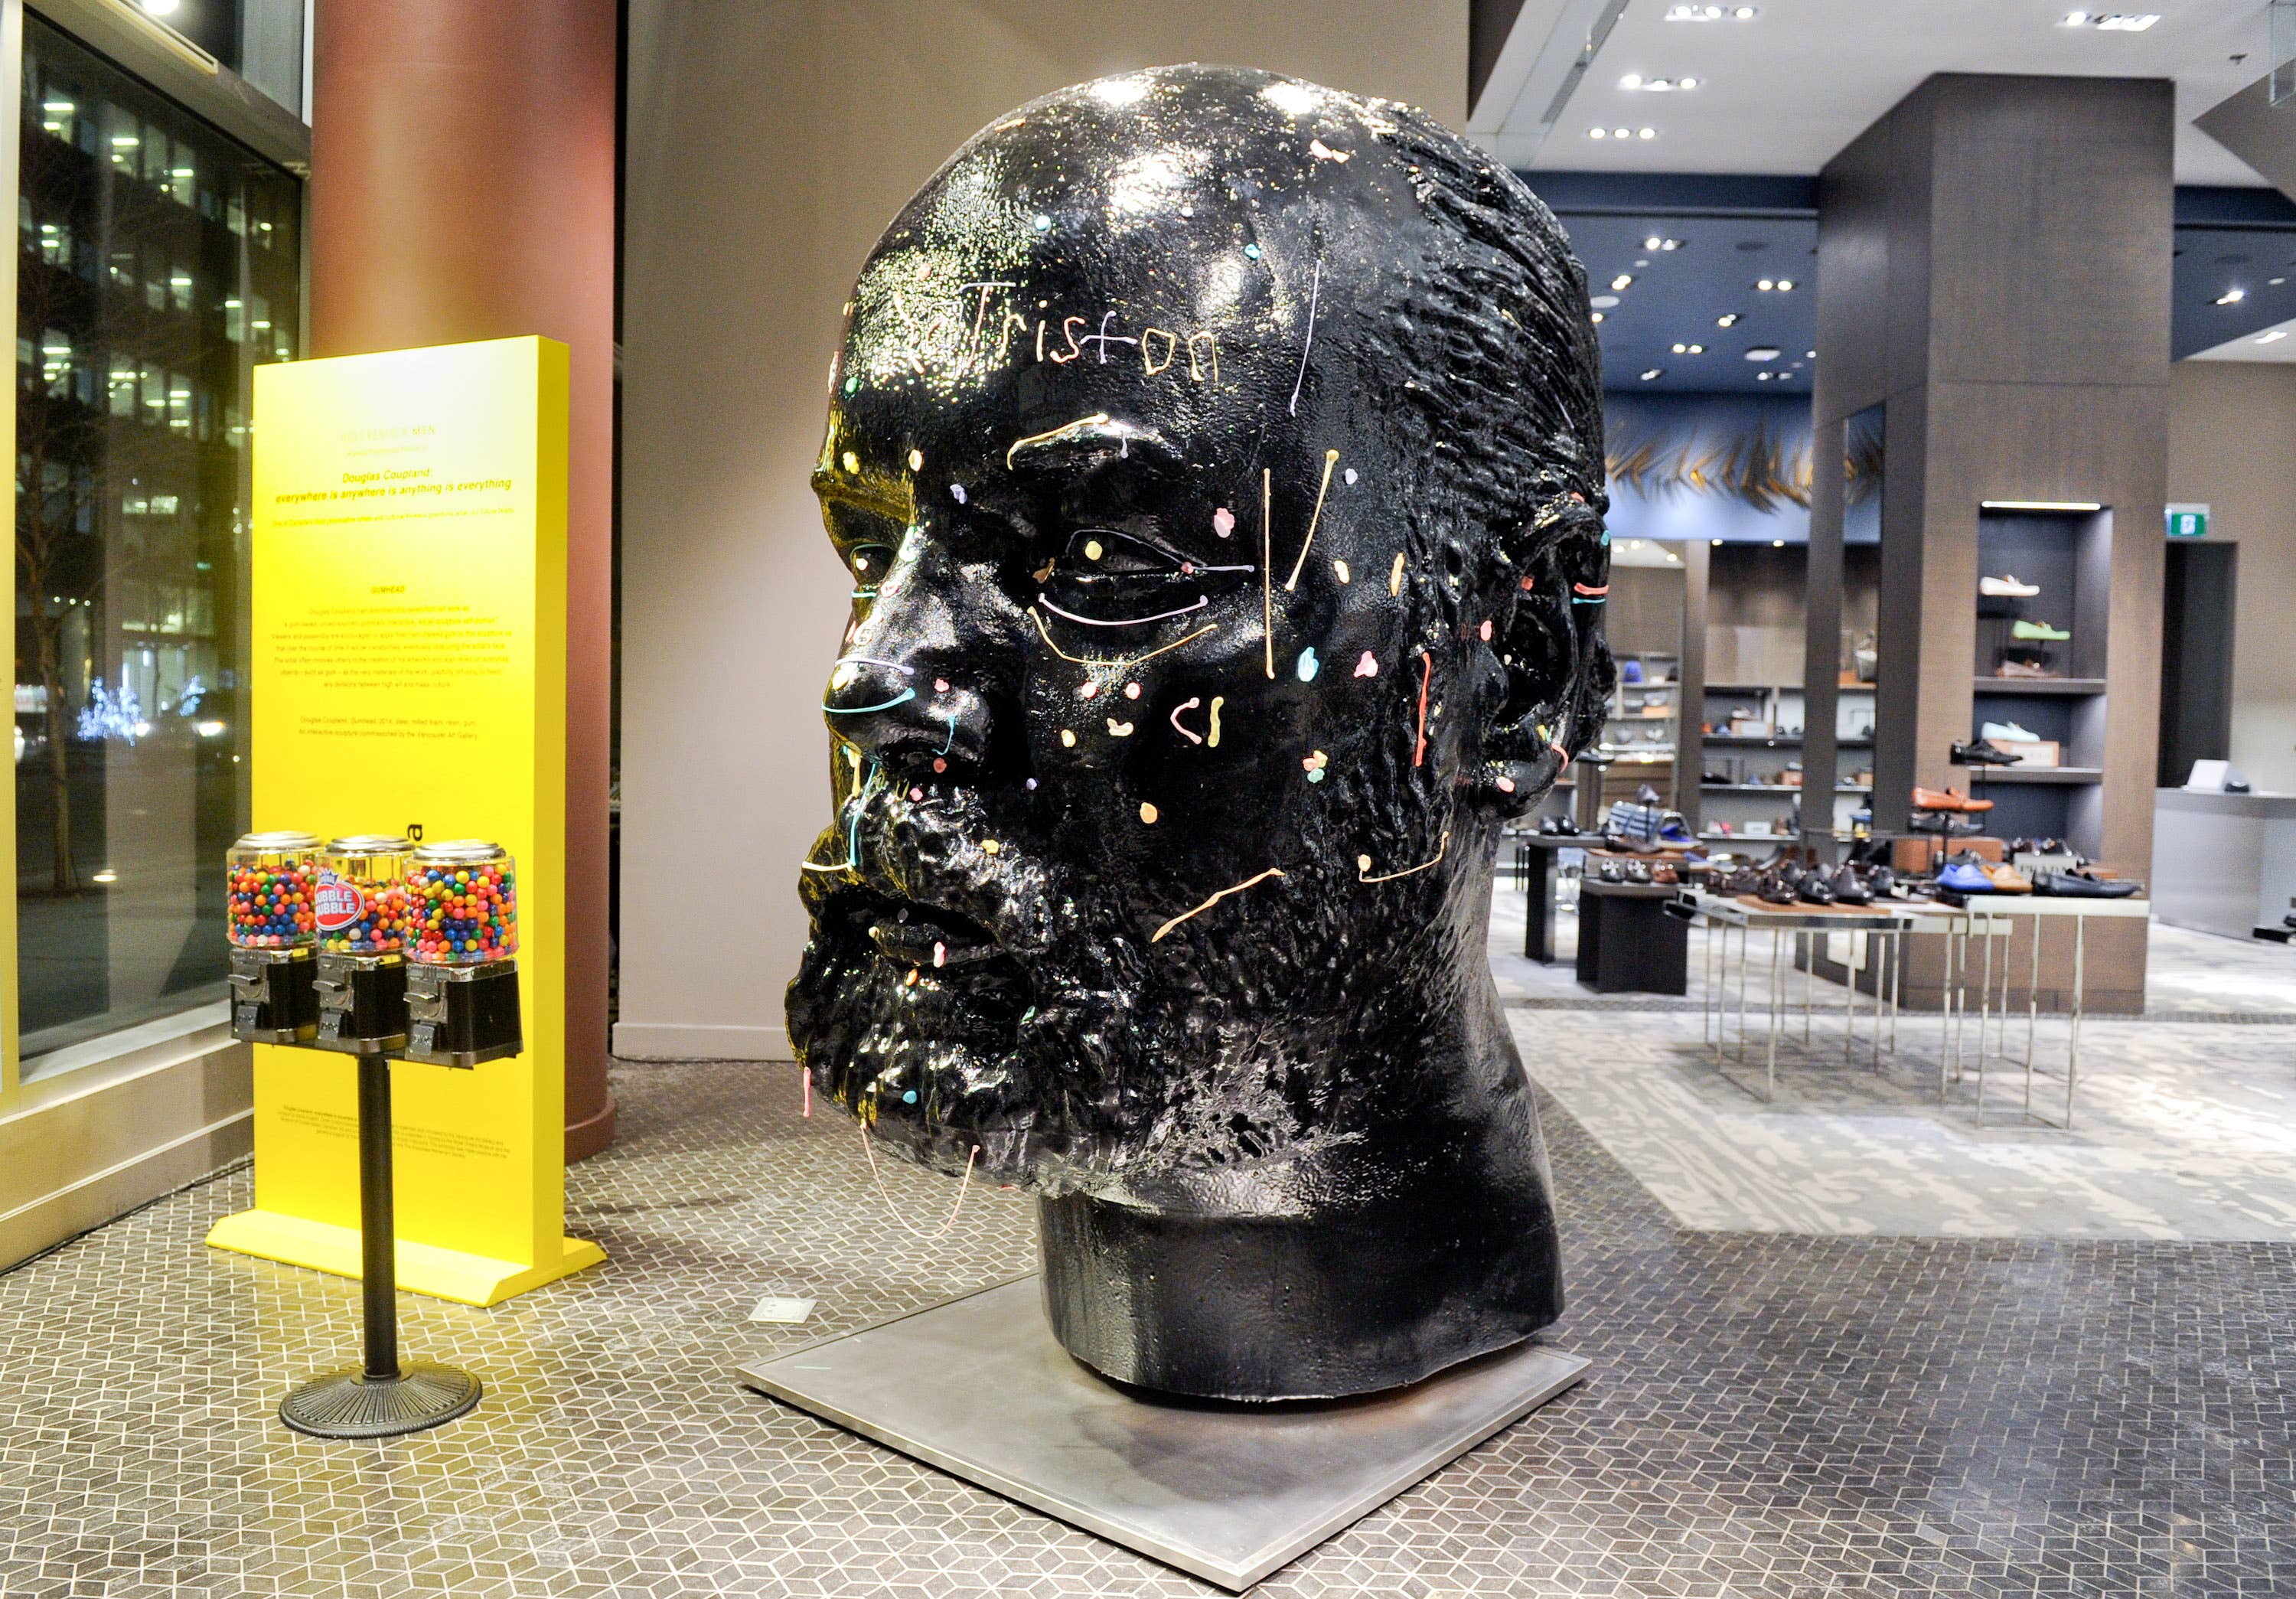 Toronto’s Holt Renfrew Men is encouraging guests to chew their gum and stick it on Douglas Coupland’s Gumhead sculpture